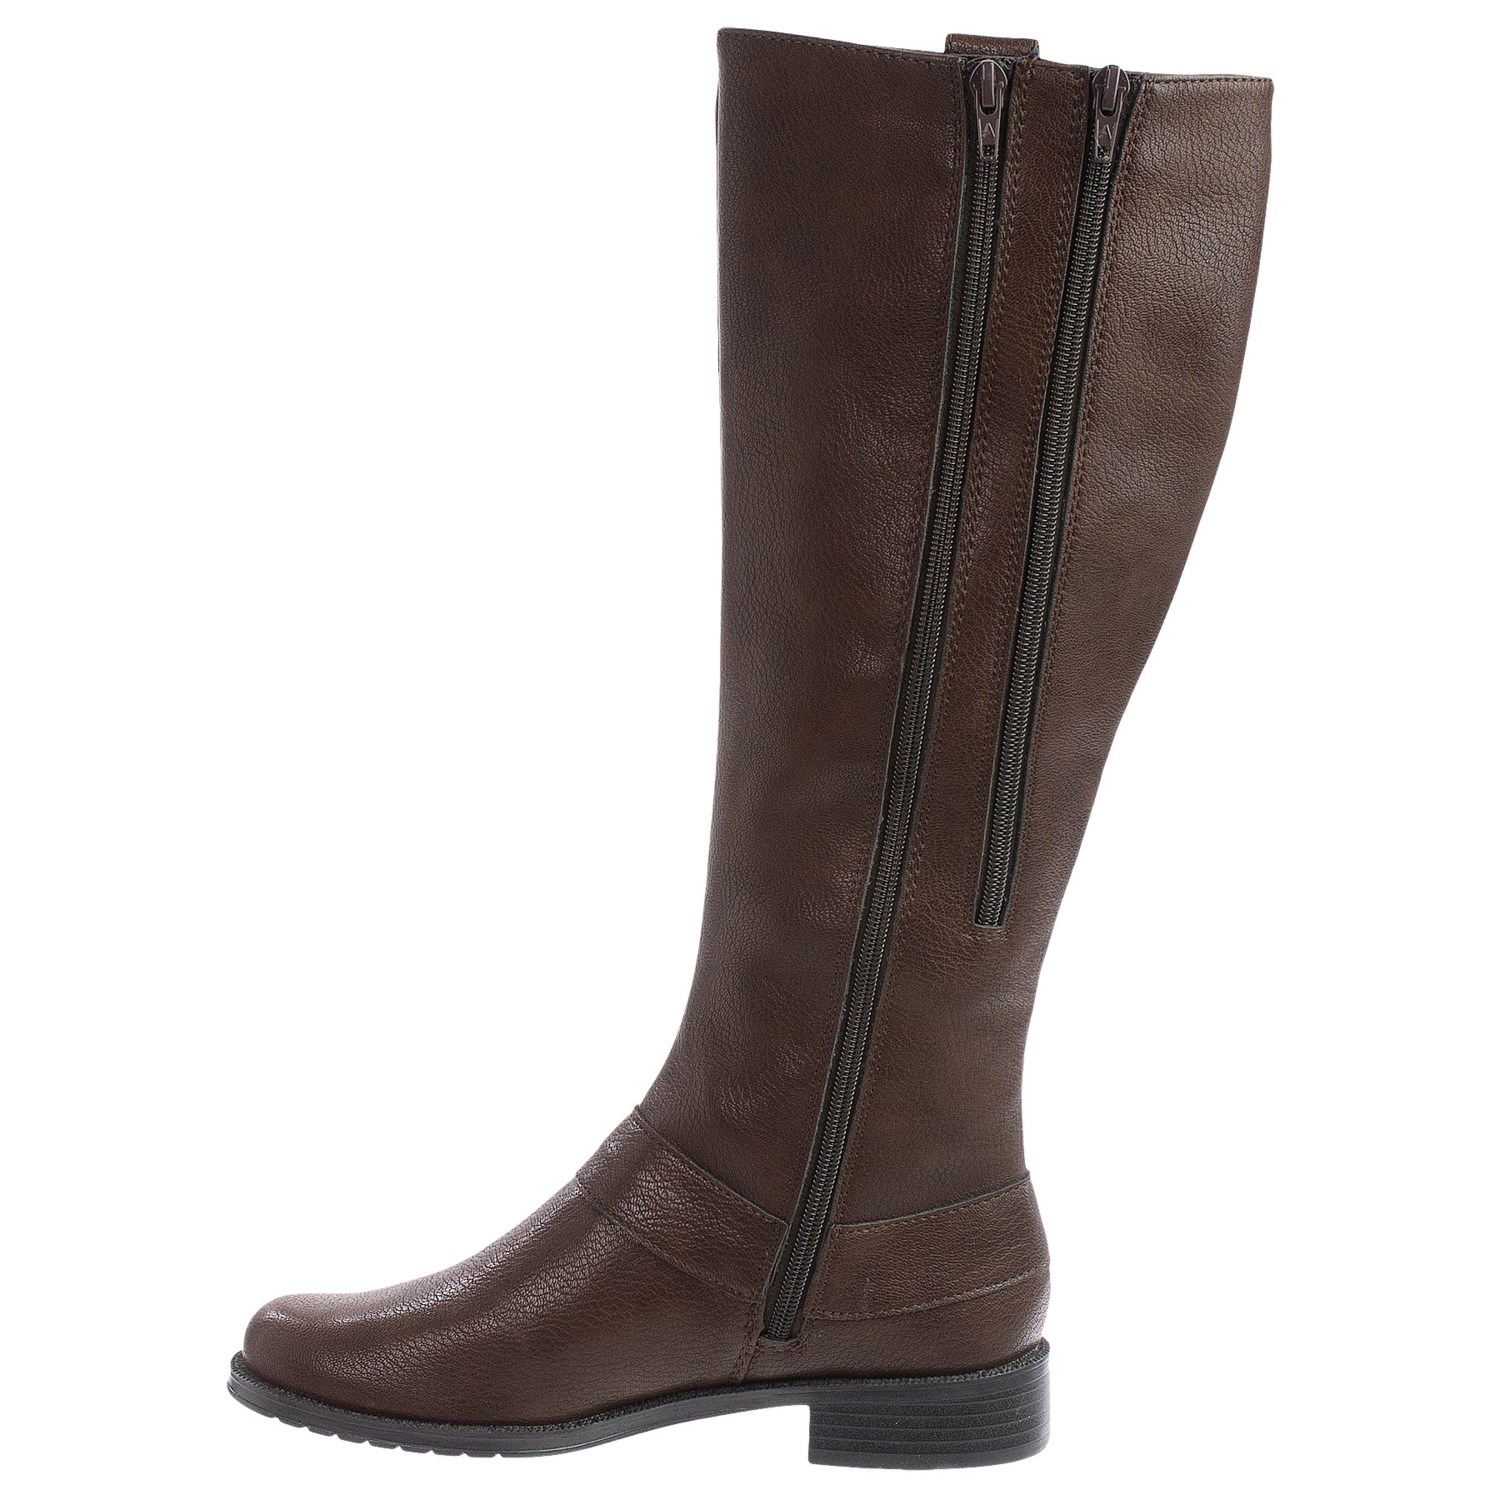 Aerosoles Easy Rider Riding Boots (For Women) - Save 50%